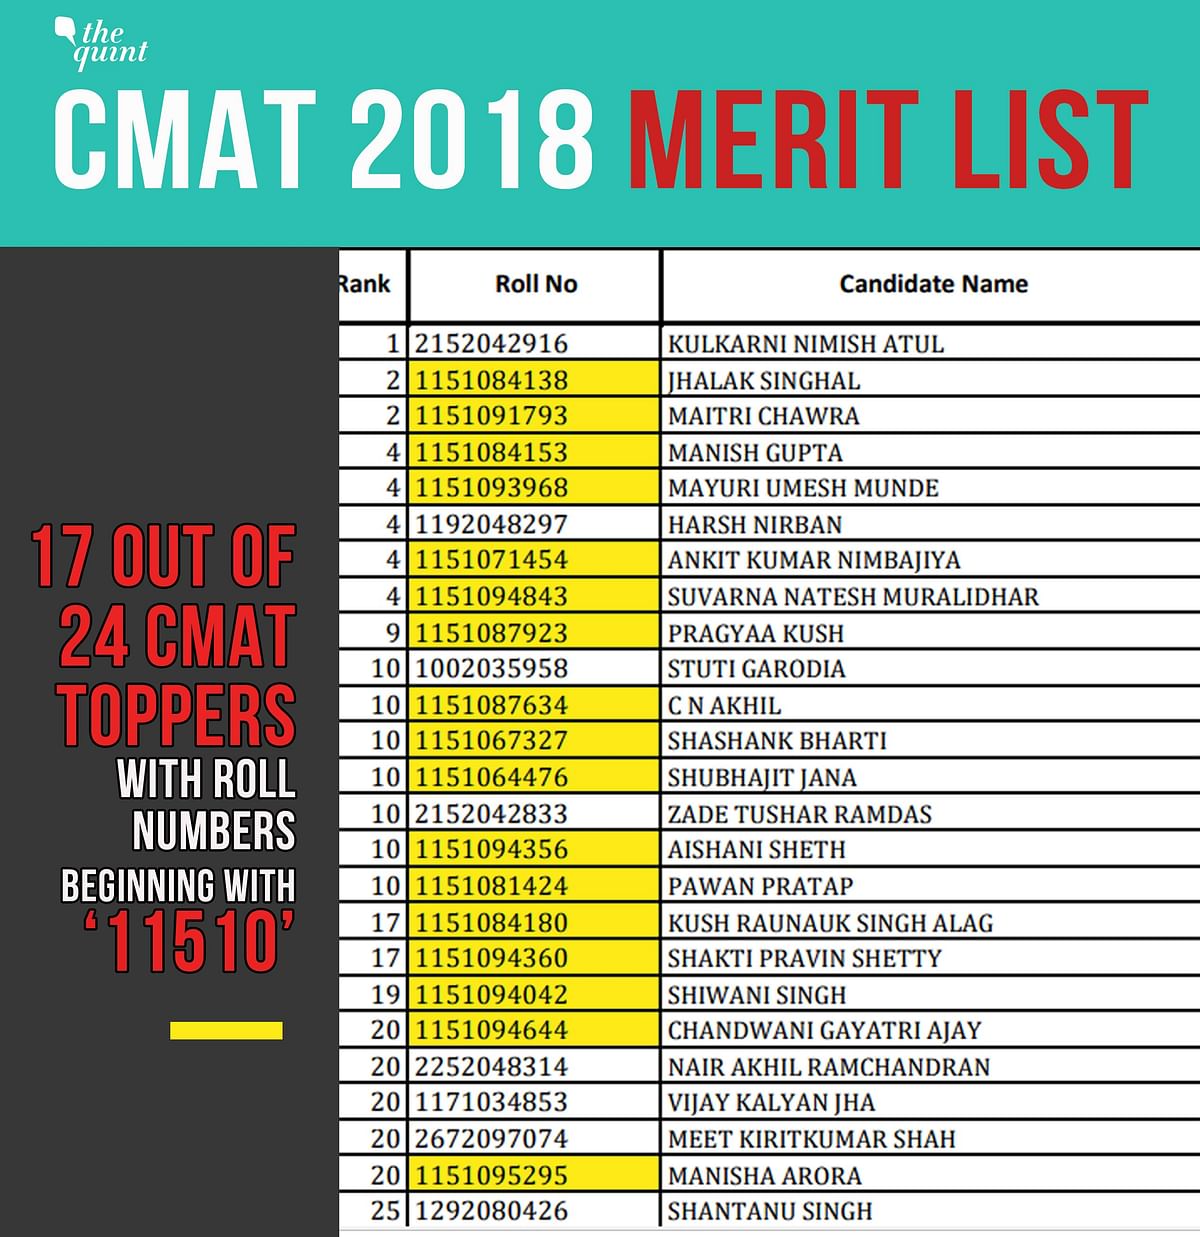 17 out of 24 candidates in the top 20 list in CMAT merit list belong to one centre – is this merely a coincidence?